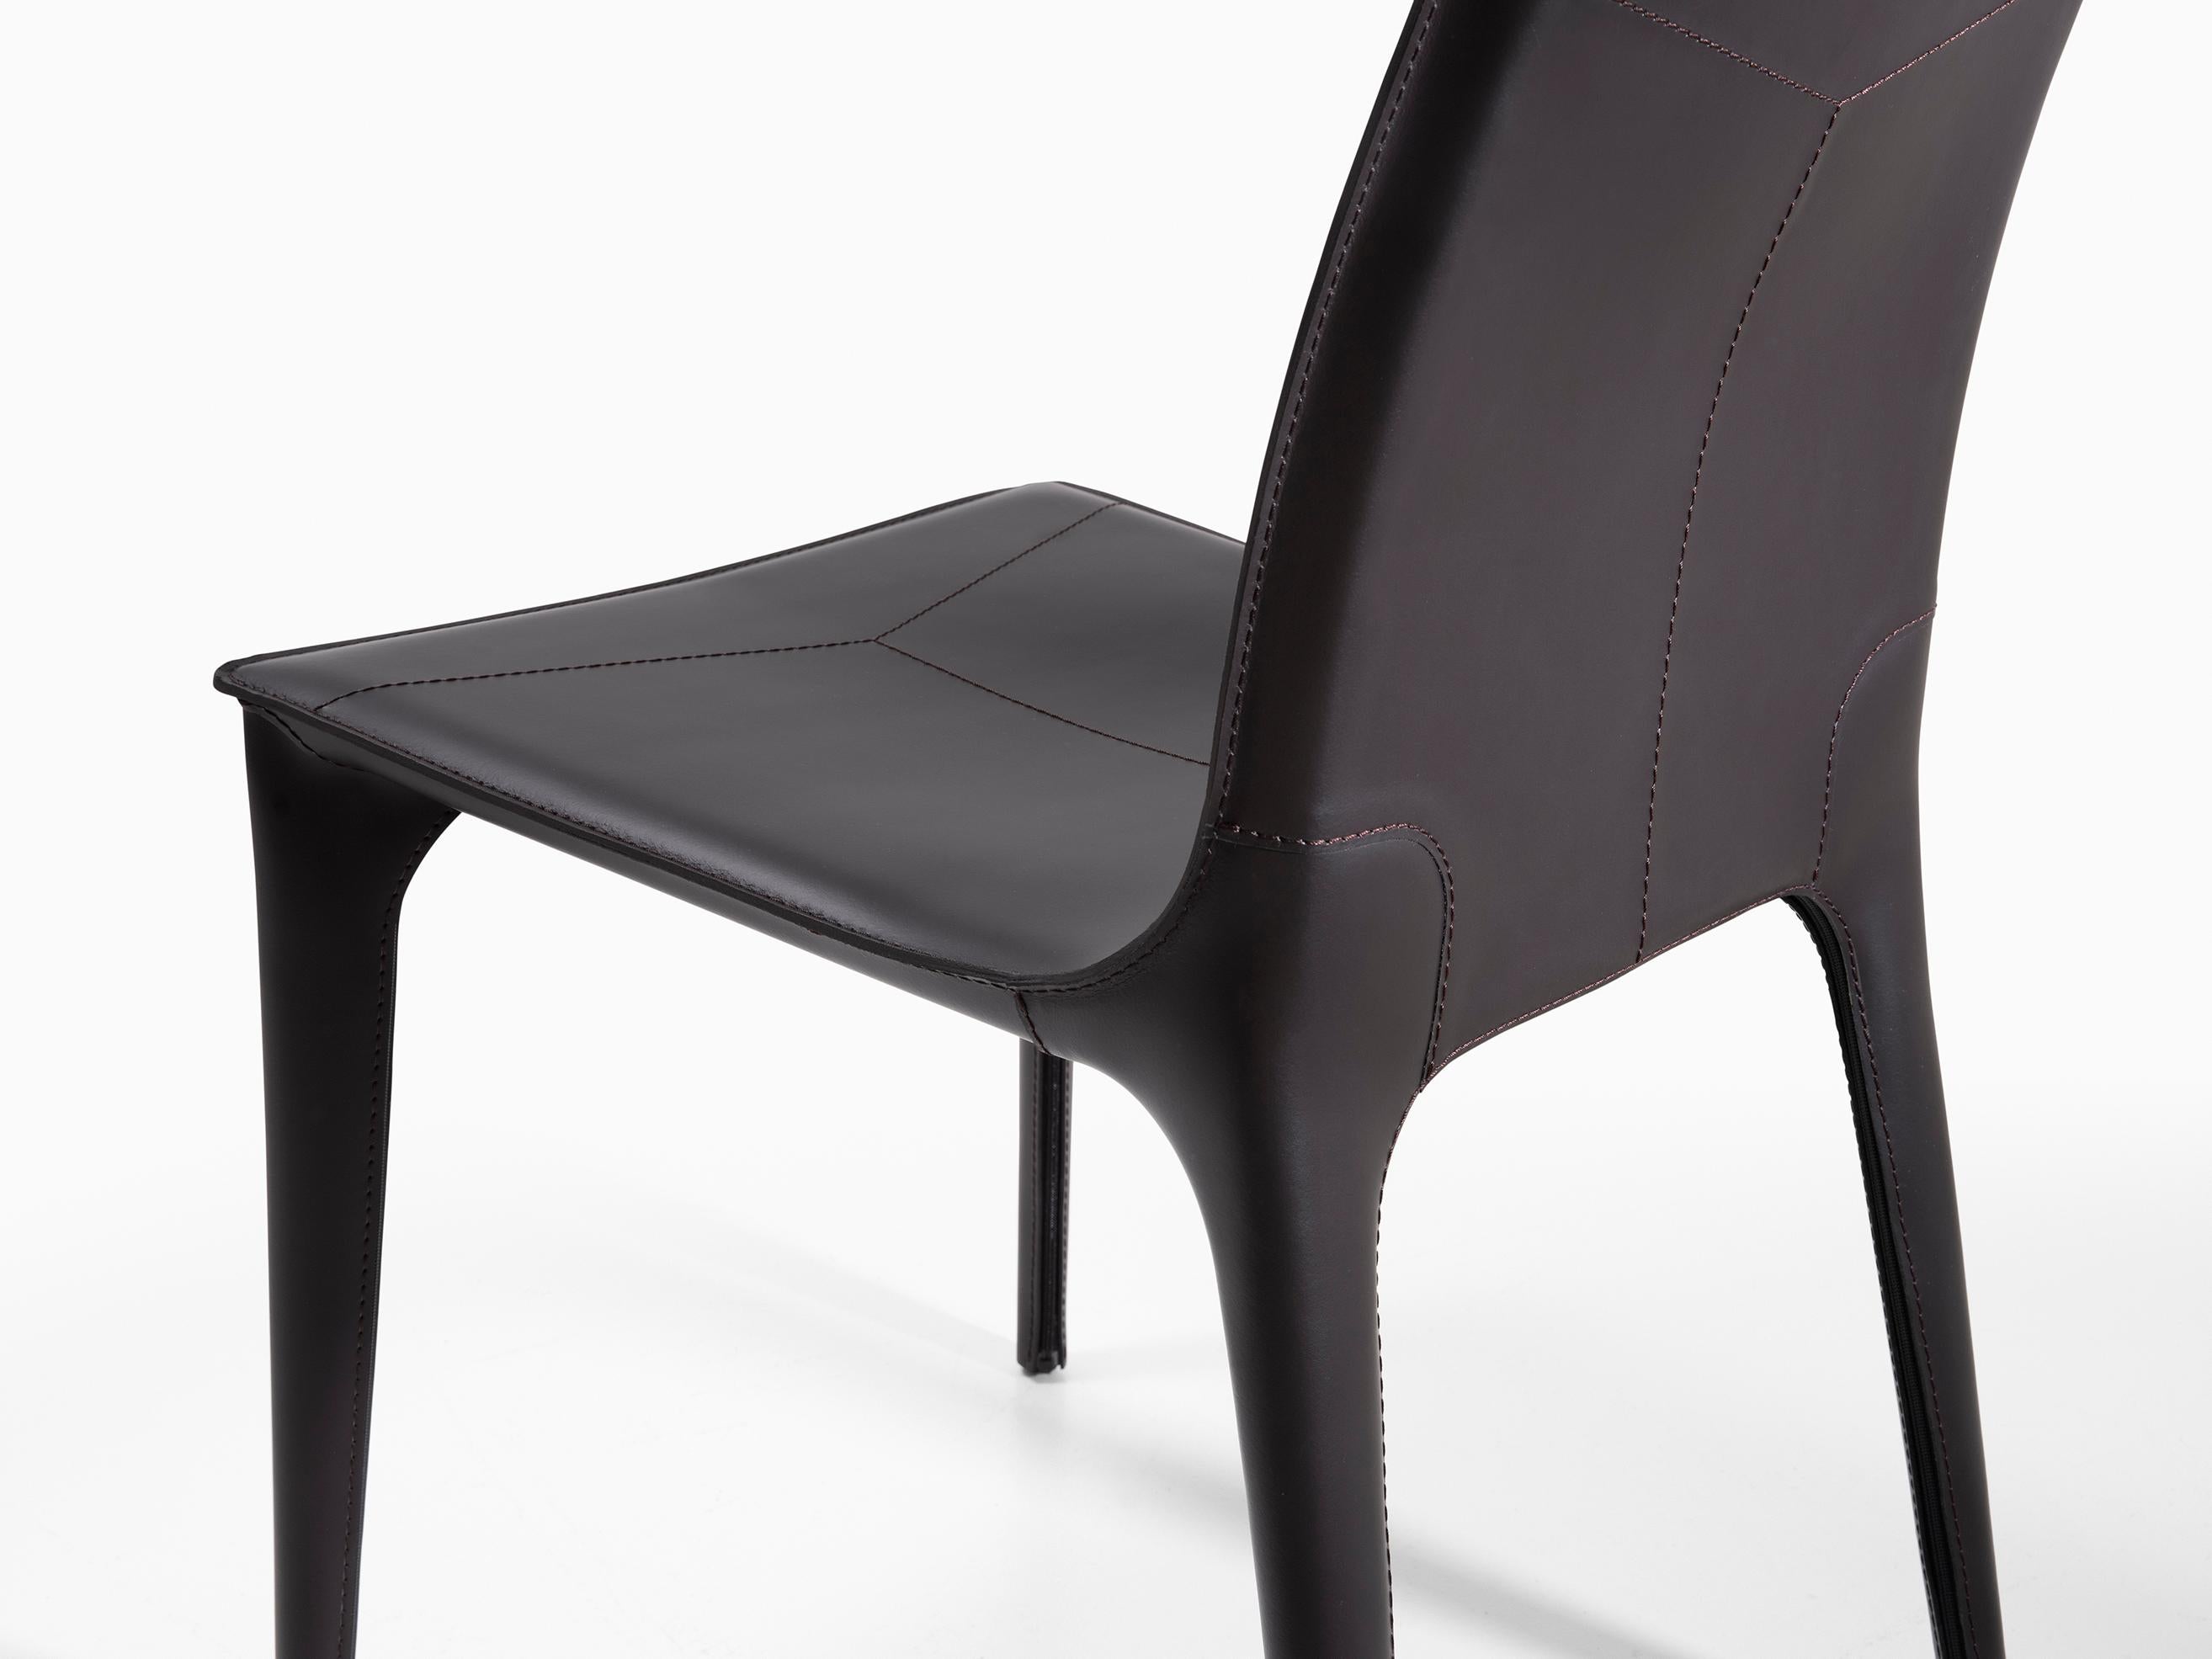 HOLLY HUNT Adriatic dining side chair in caffe leather. This simple and elegant dining chair is covered in Italian saddle Leather. From the slightly curved back and slender legs, the lines of this chair flow one into the next for a seamless, modern